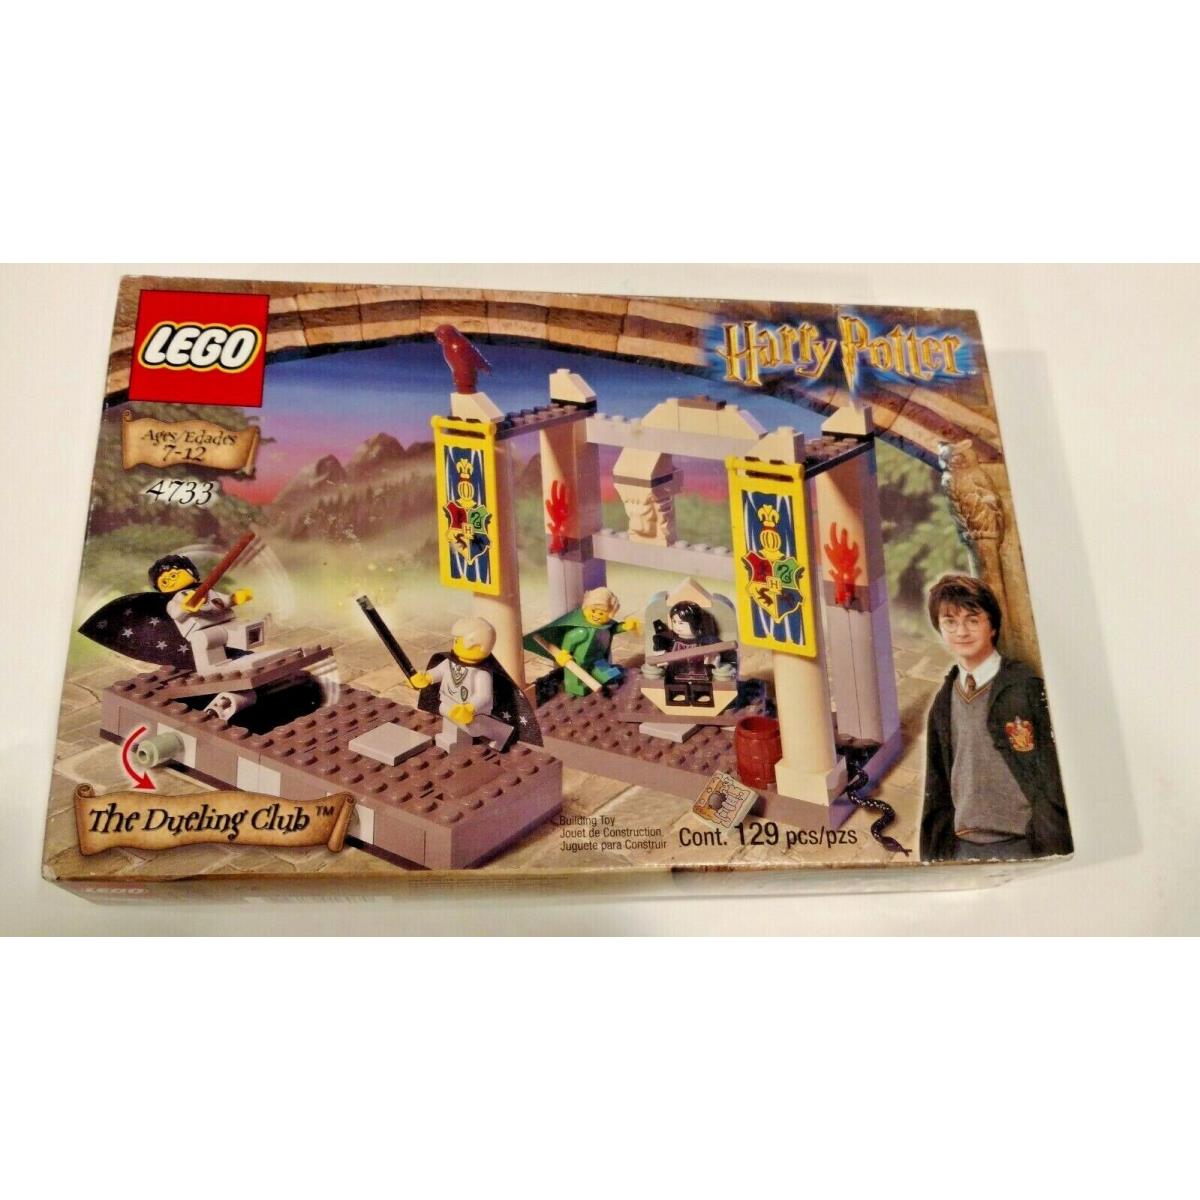 Lego Harry Potter 4733 The Dueling Club 2002 Building Toy Set